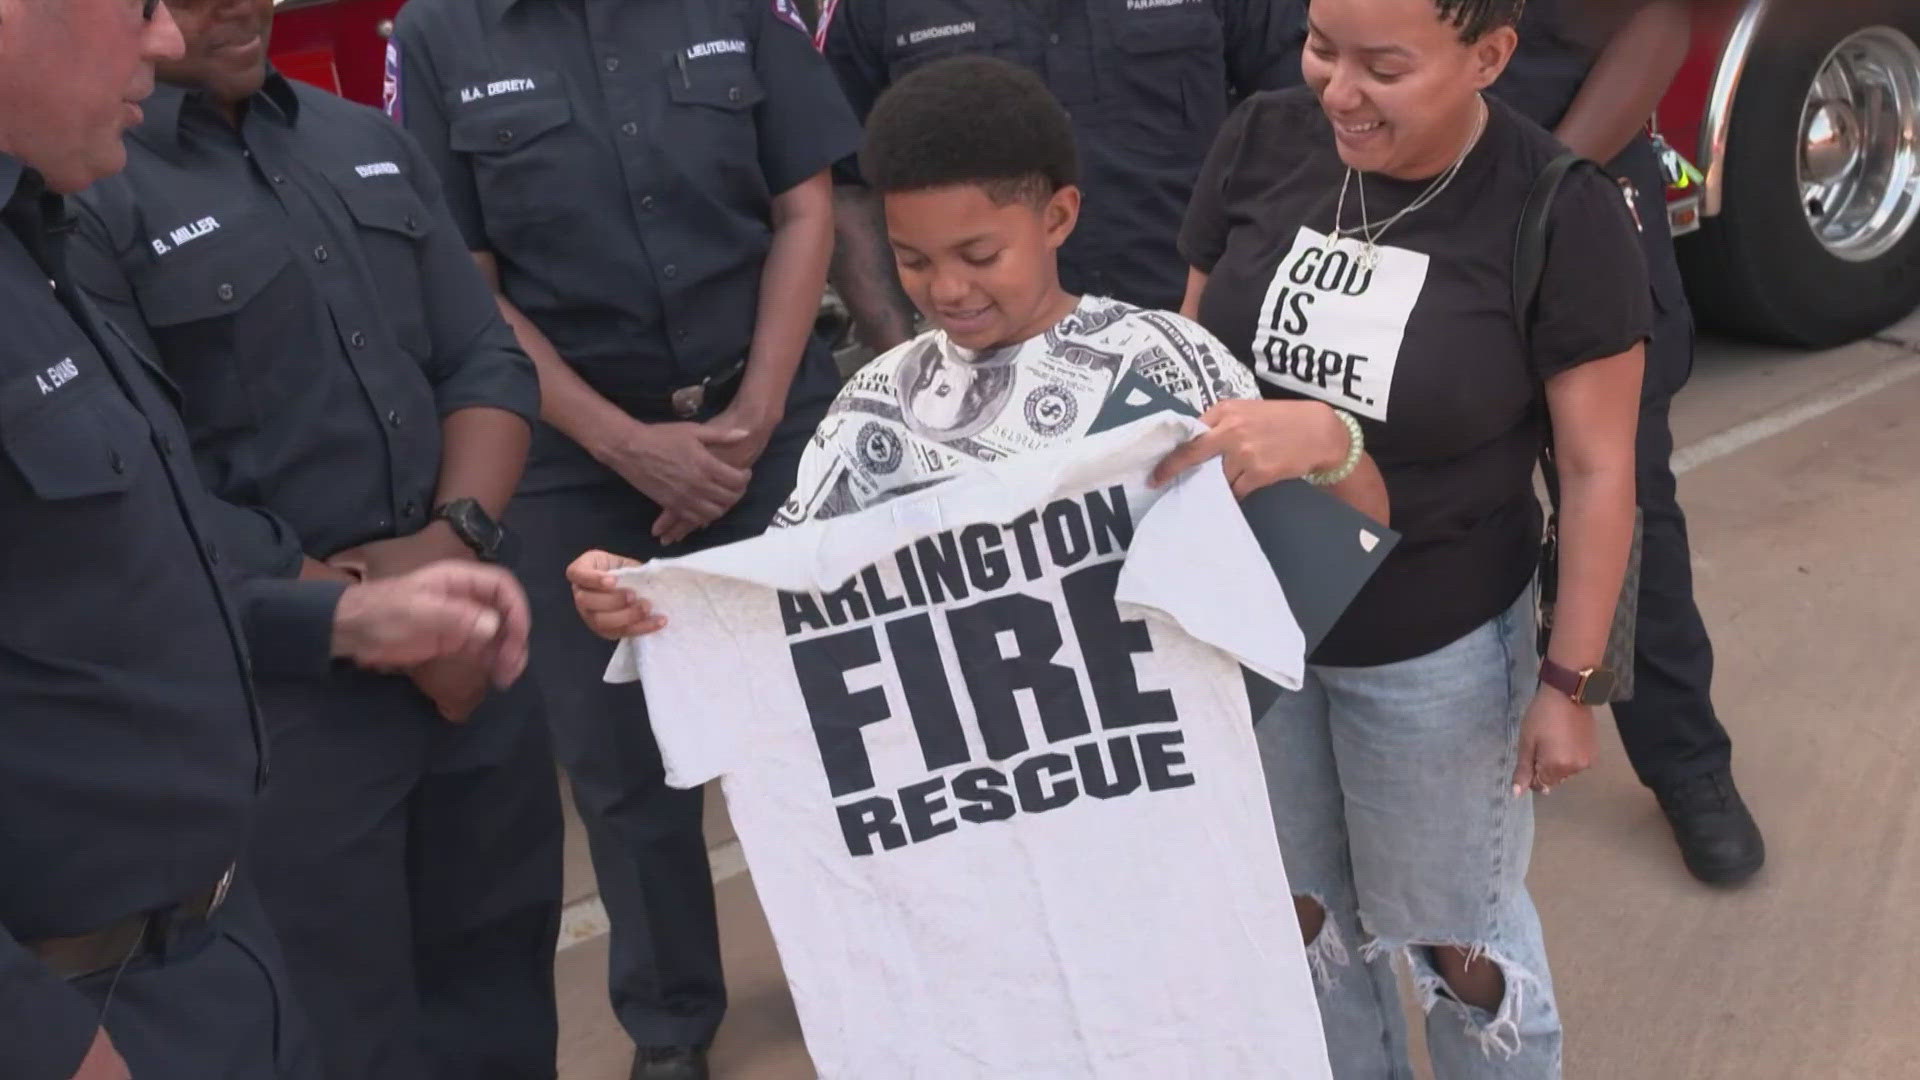 The 9-year-old was honored by the Arlington police department.